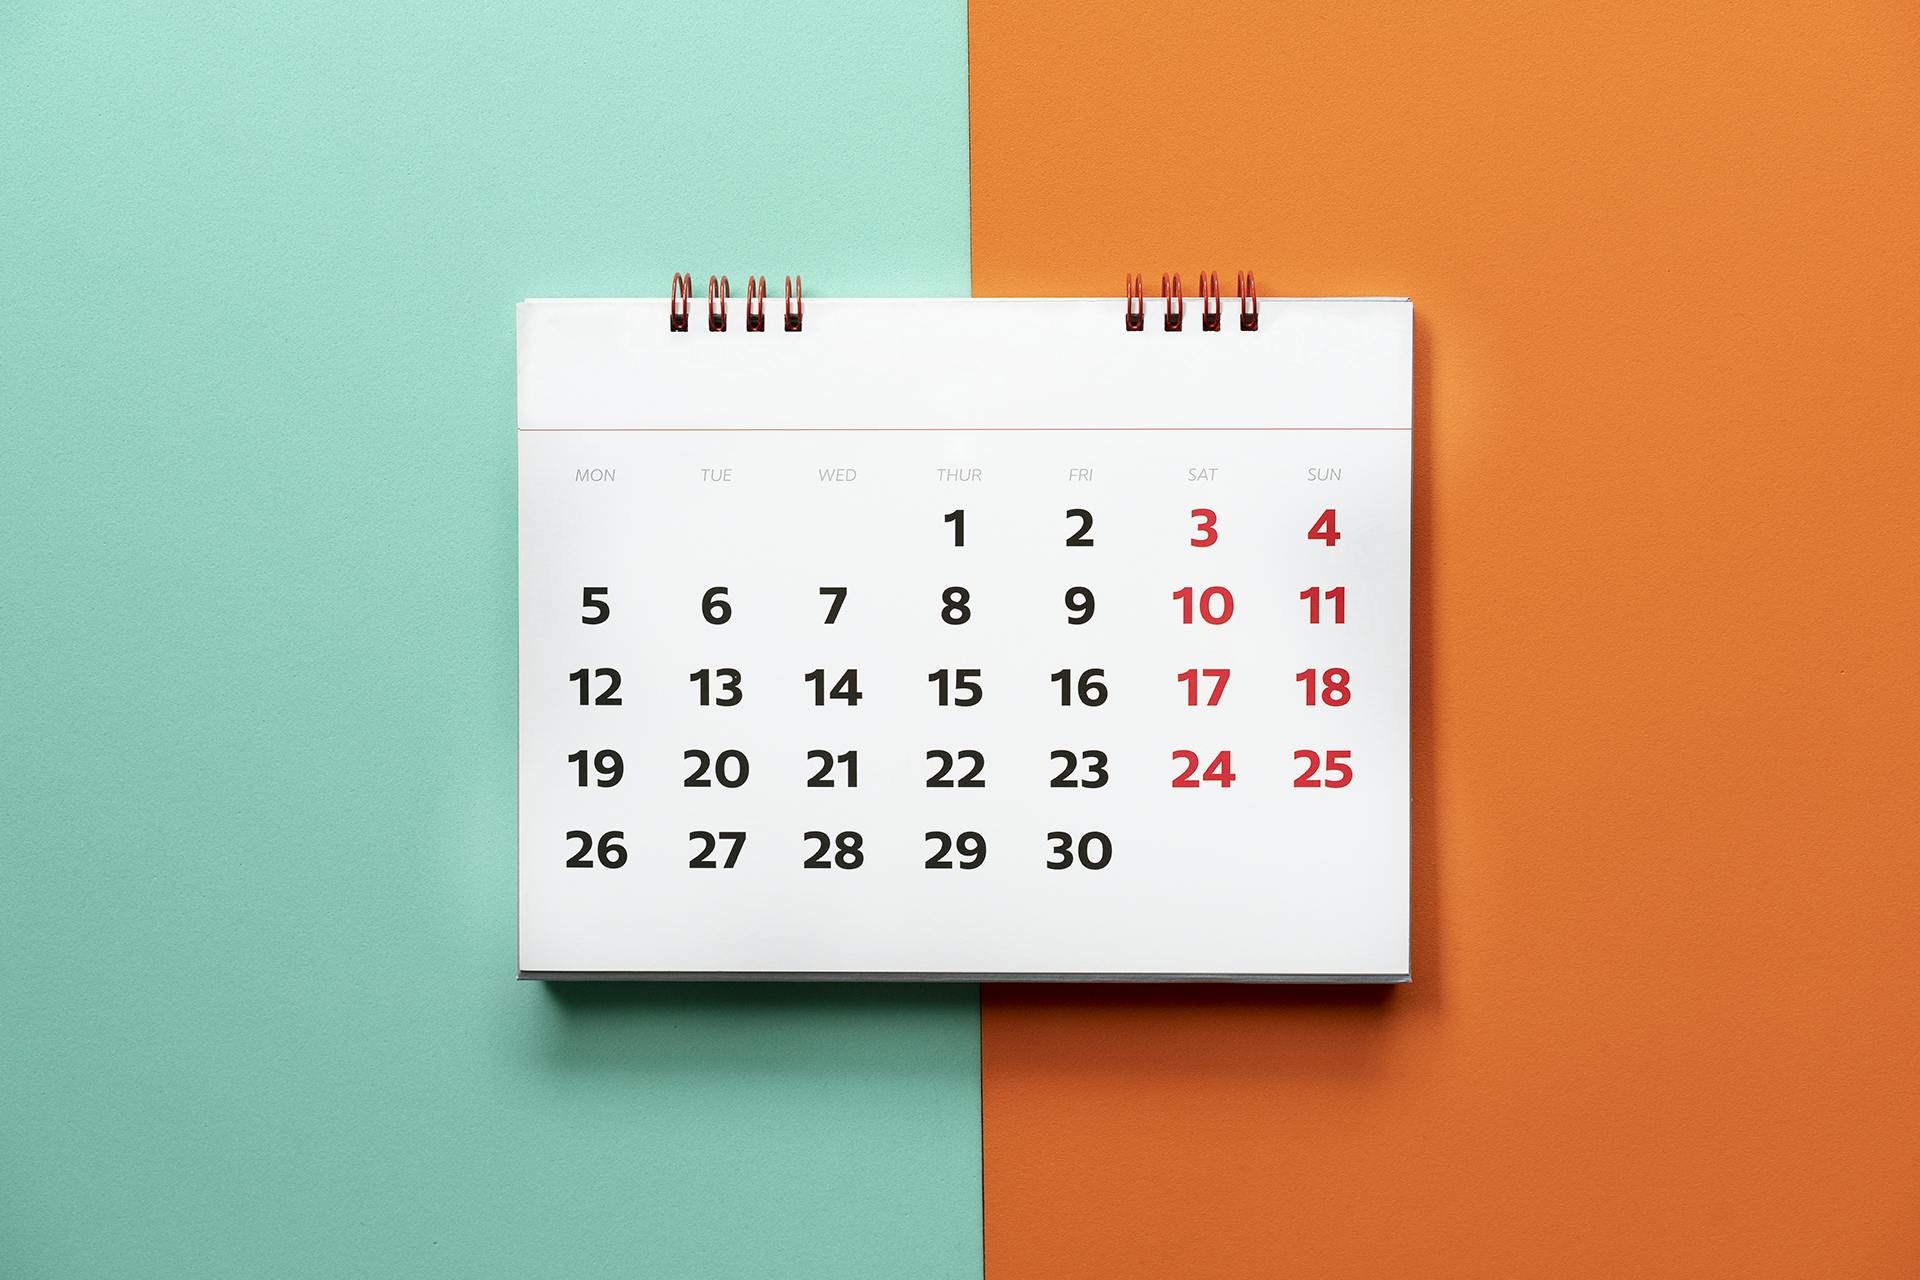 Calendar on an orange and green background